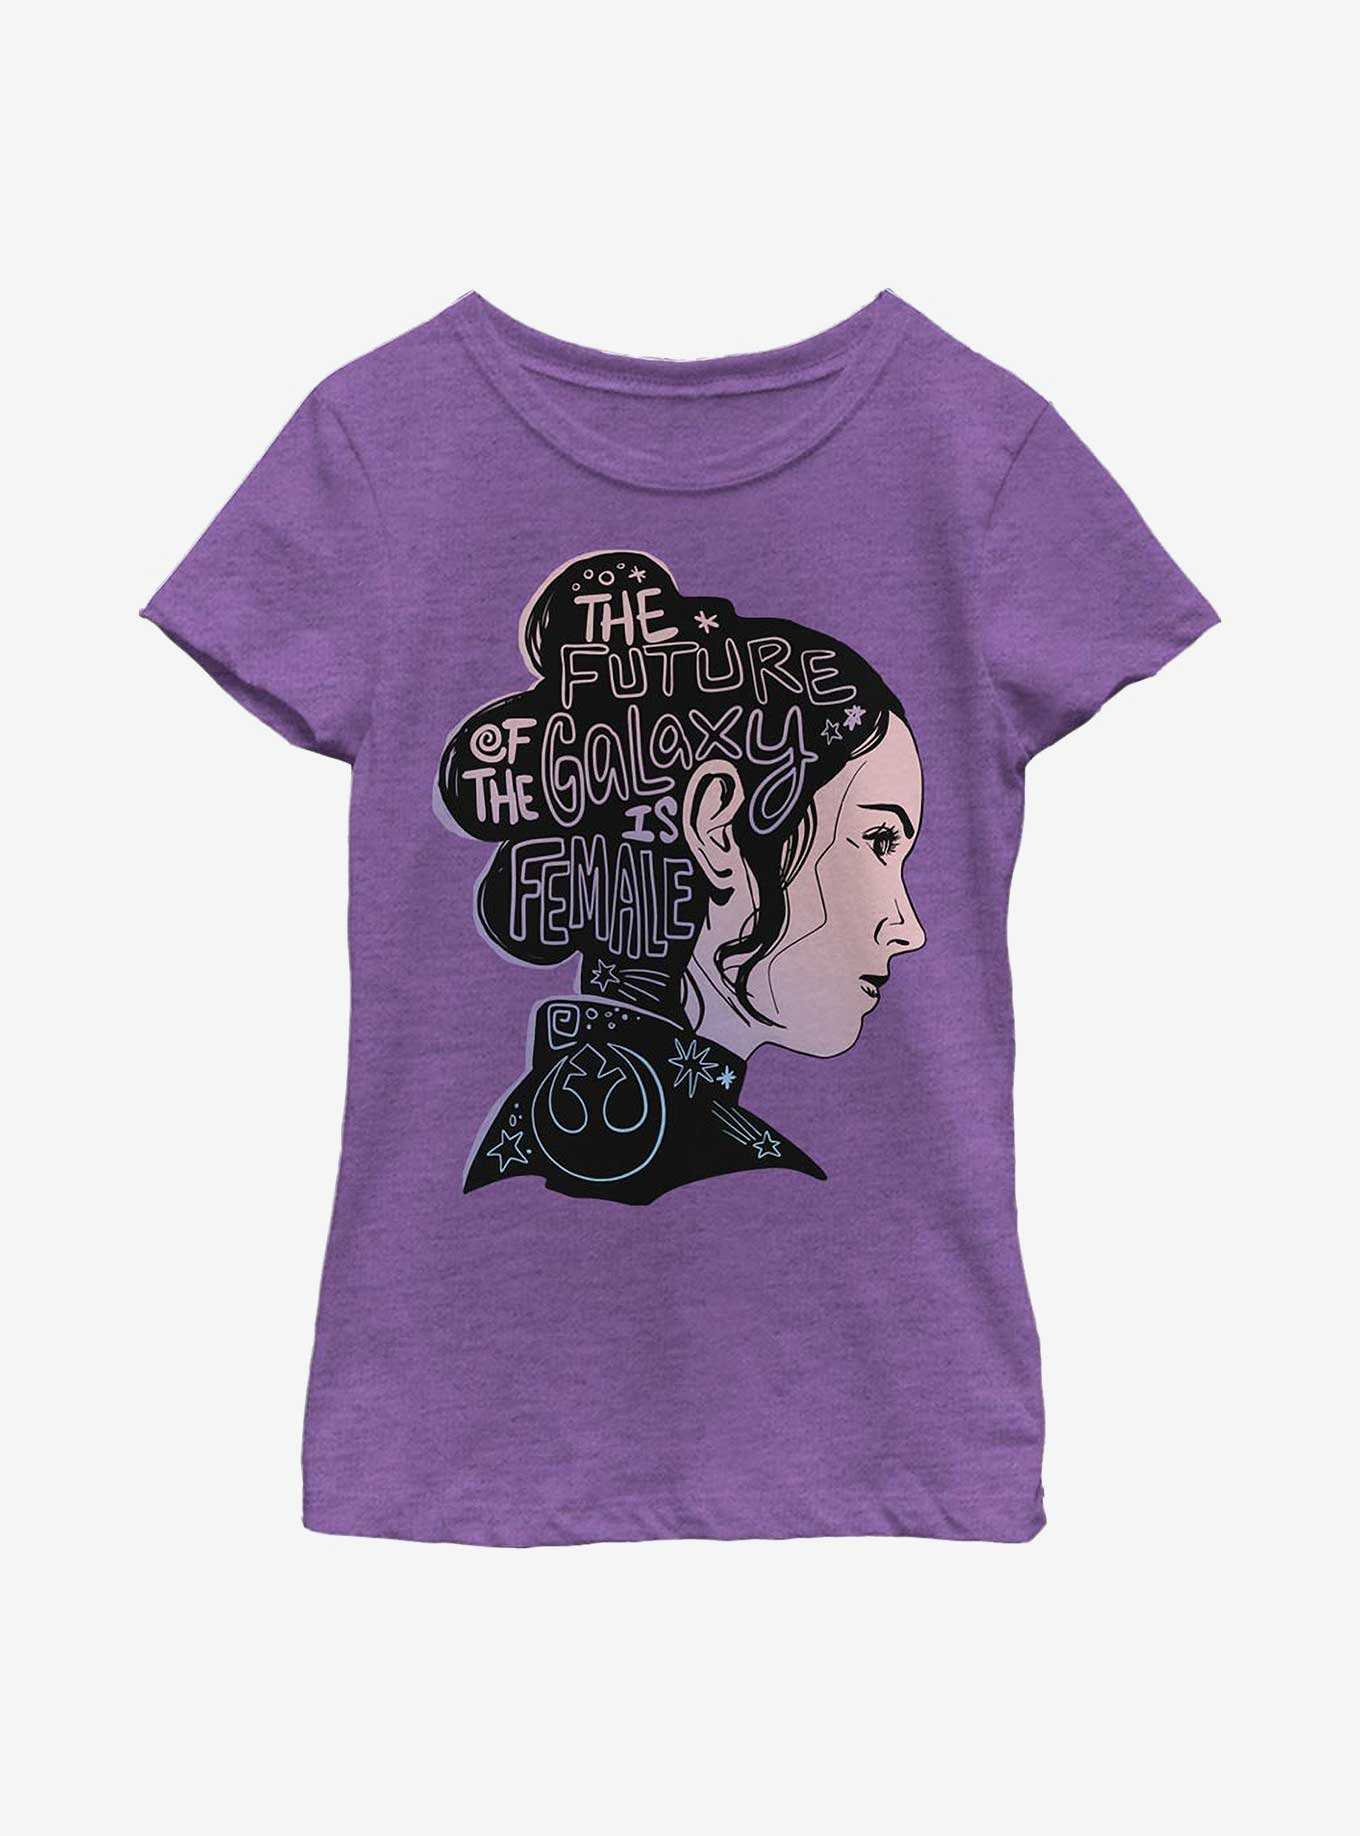 Star Wars Episode IX: The Rise Of Skywalker Female Future Silhouette Youth Girls T-Shirt, , hi-res